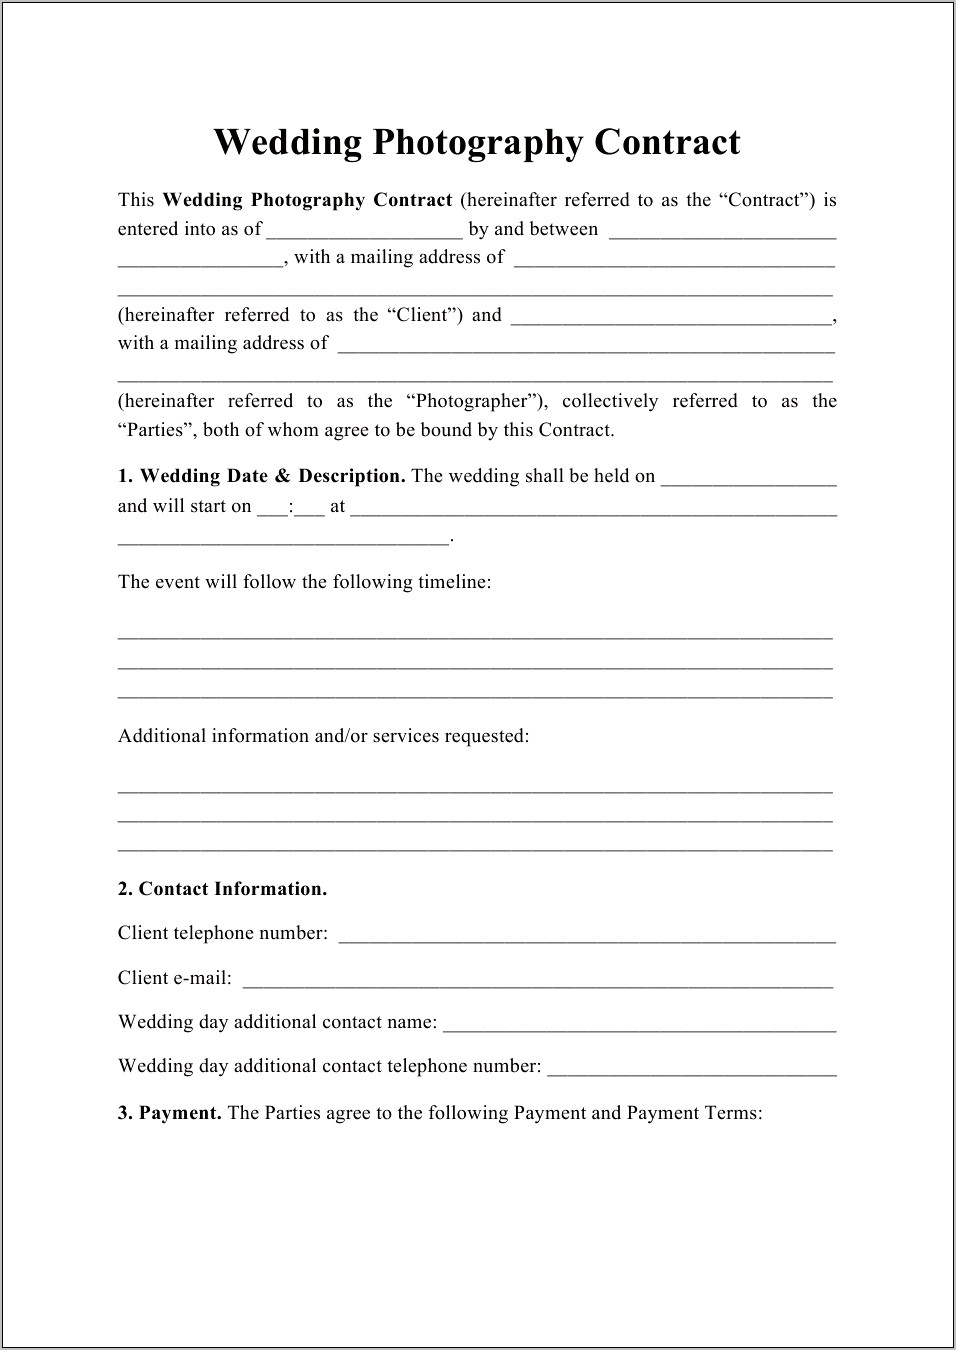 Free Wedding Photography Contract Template Word